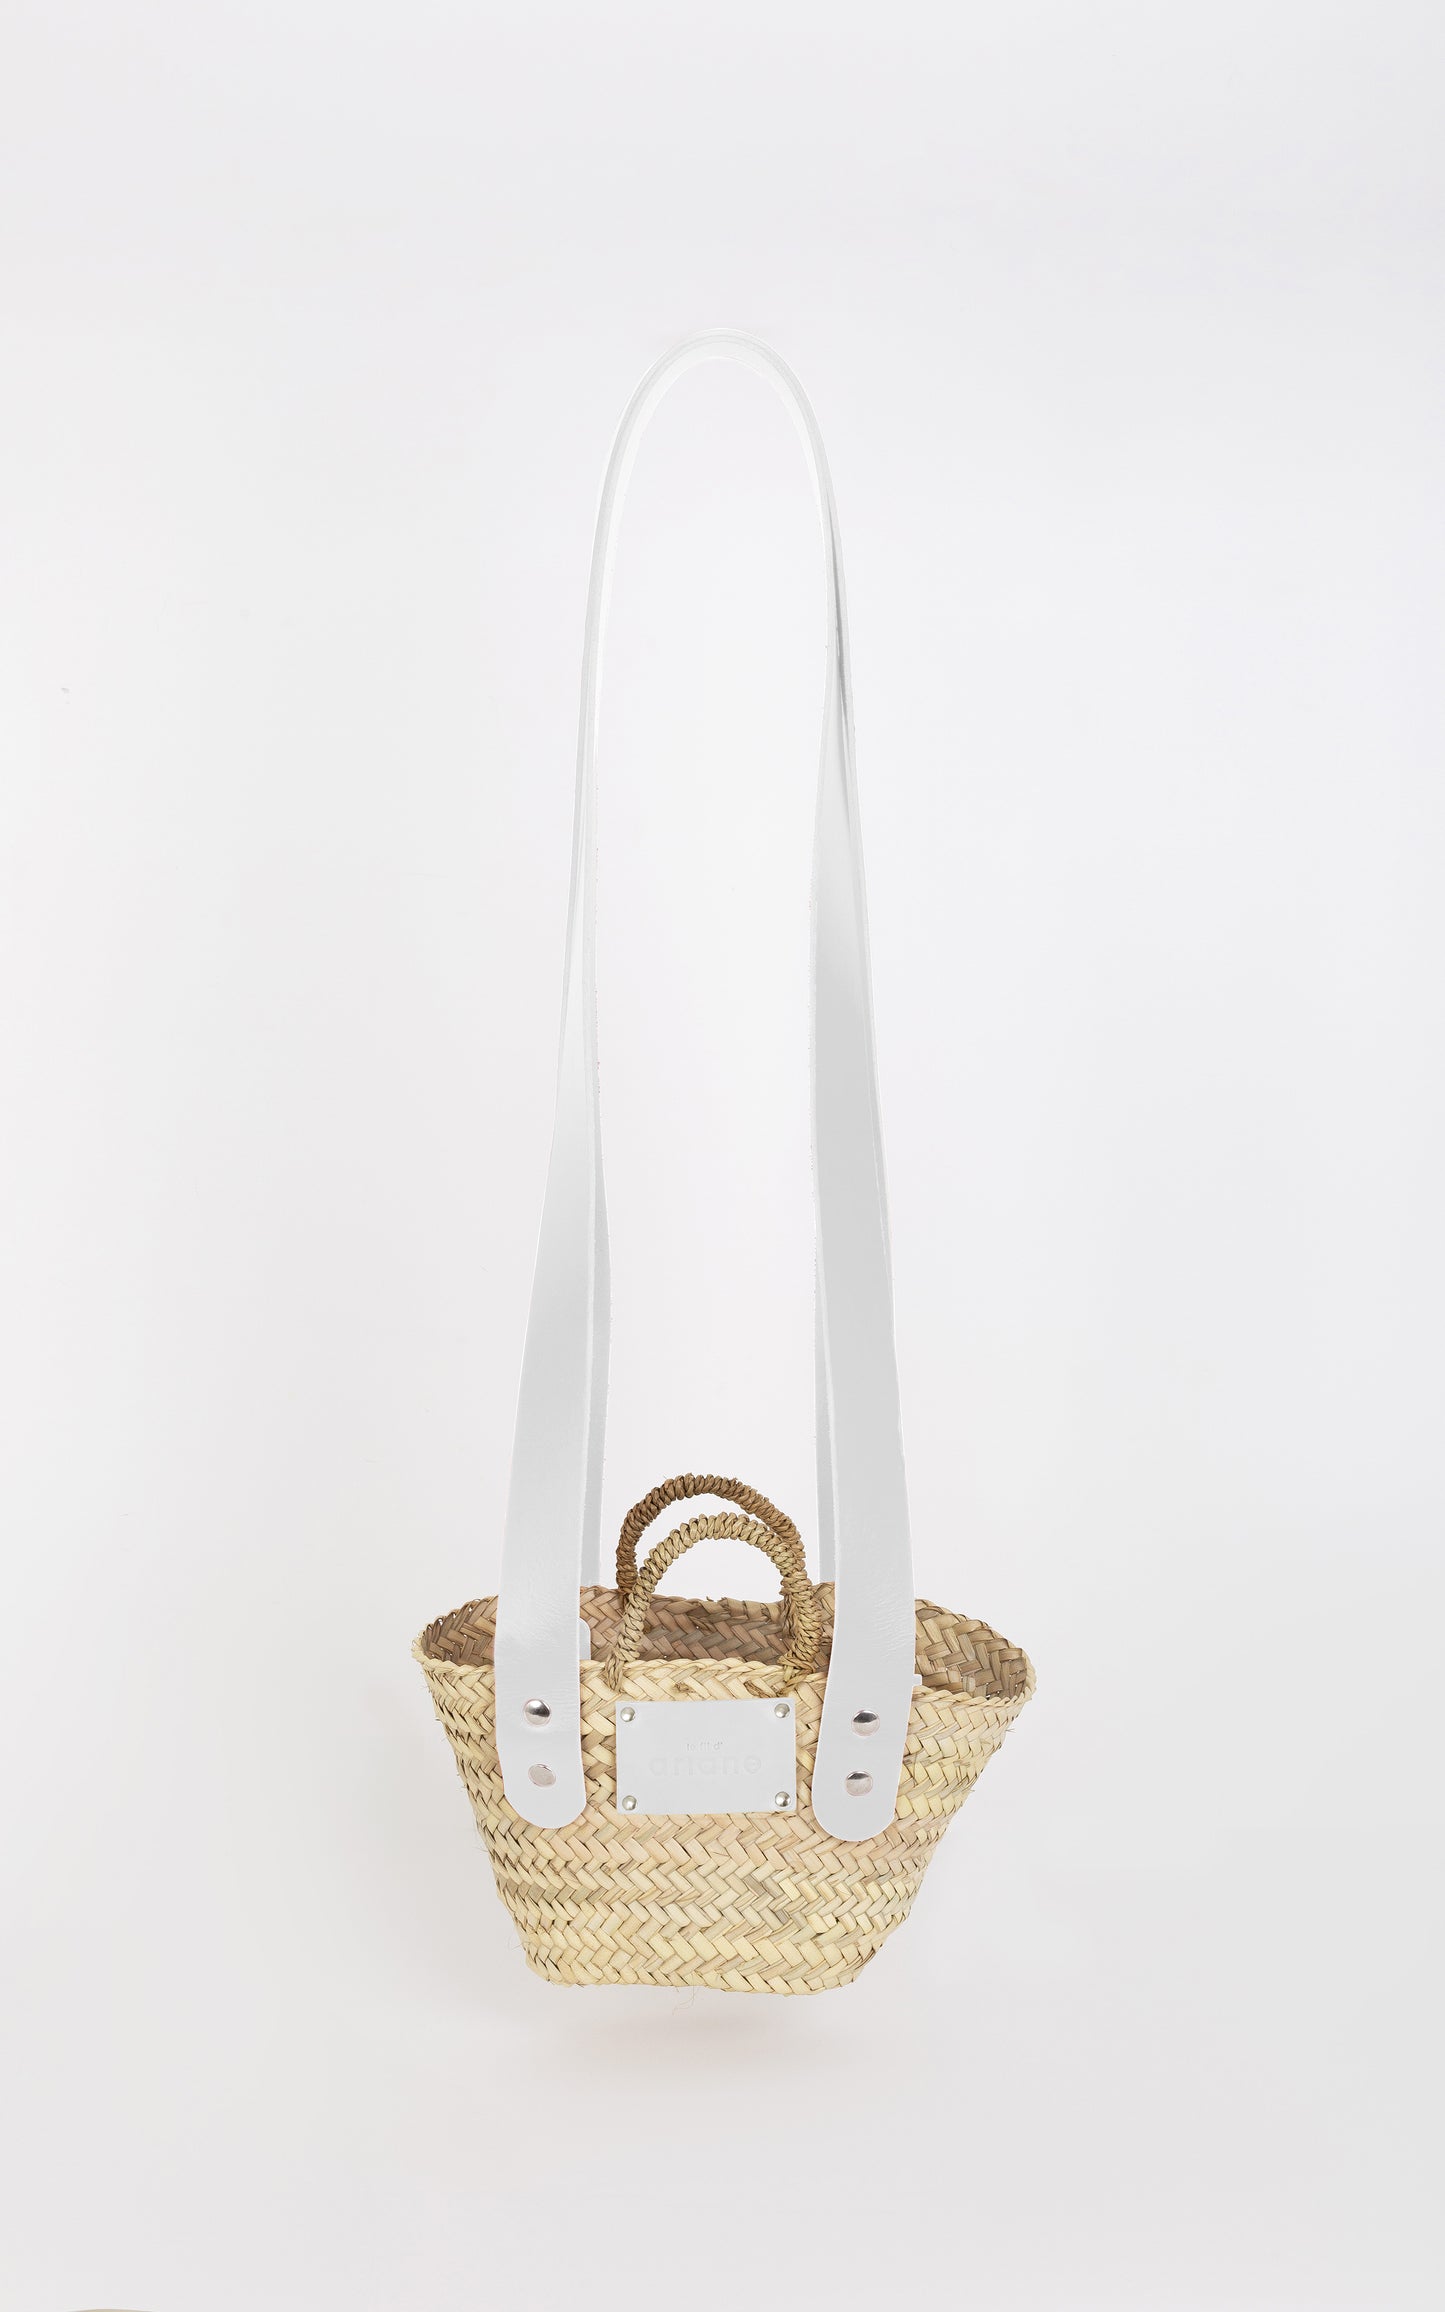 THESEE basket - Size XS - Wide white handles